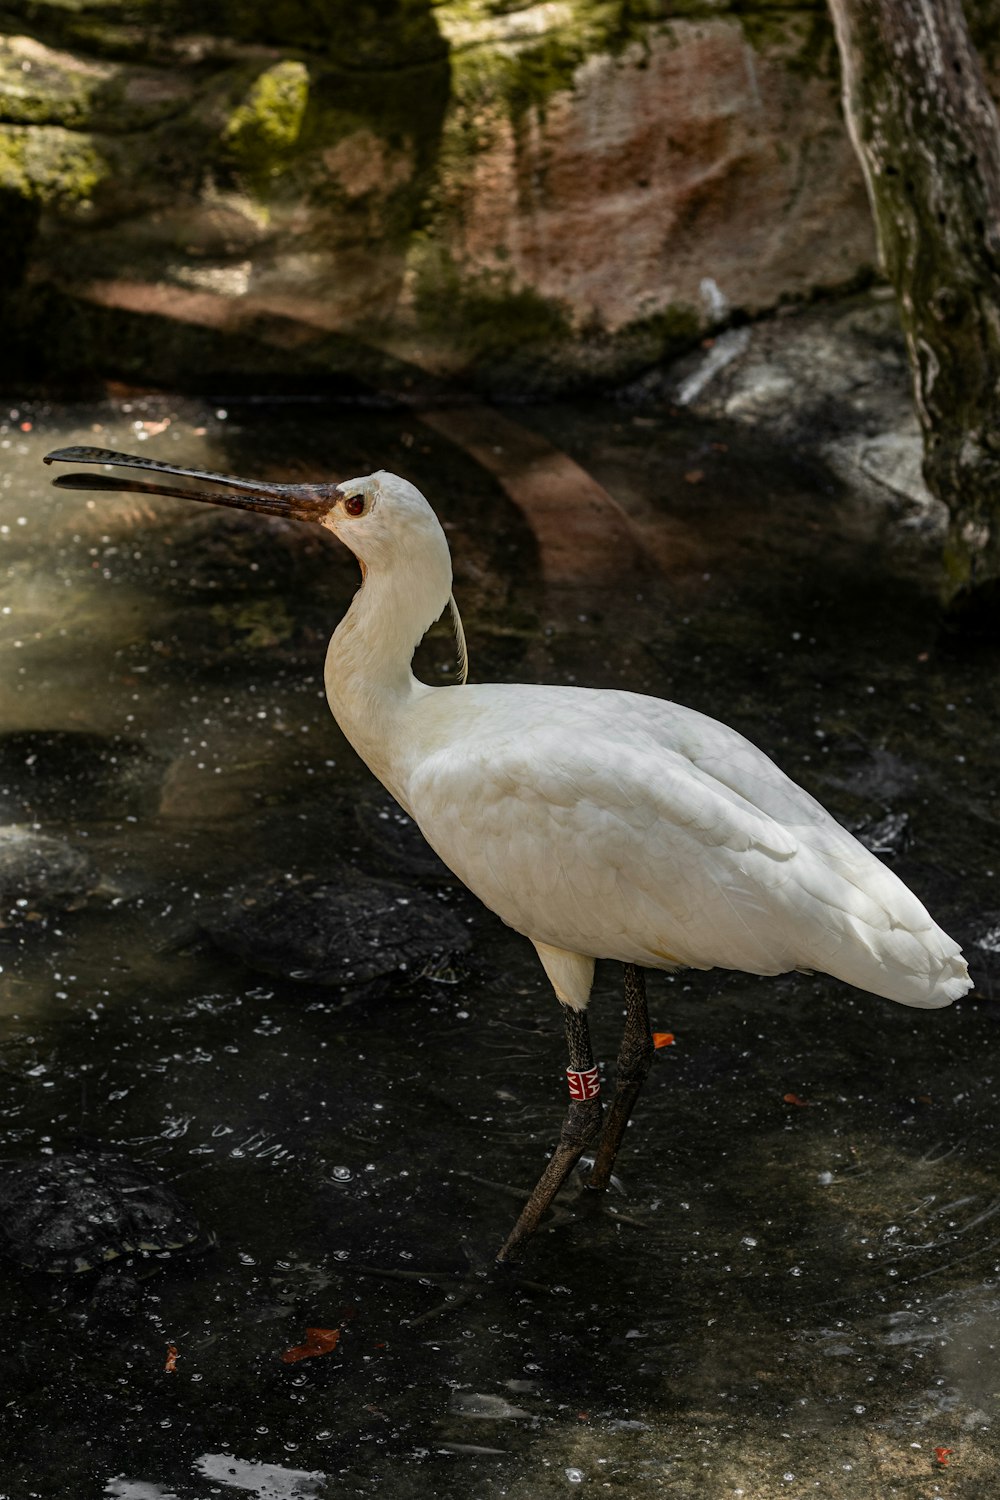 a white bird with a long beak standing in water